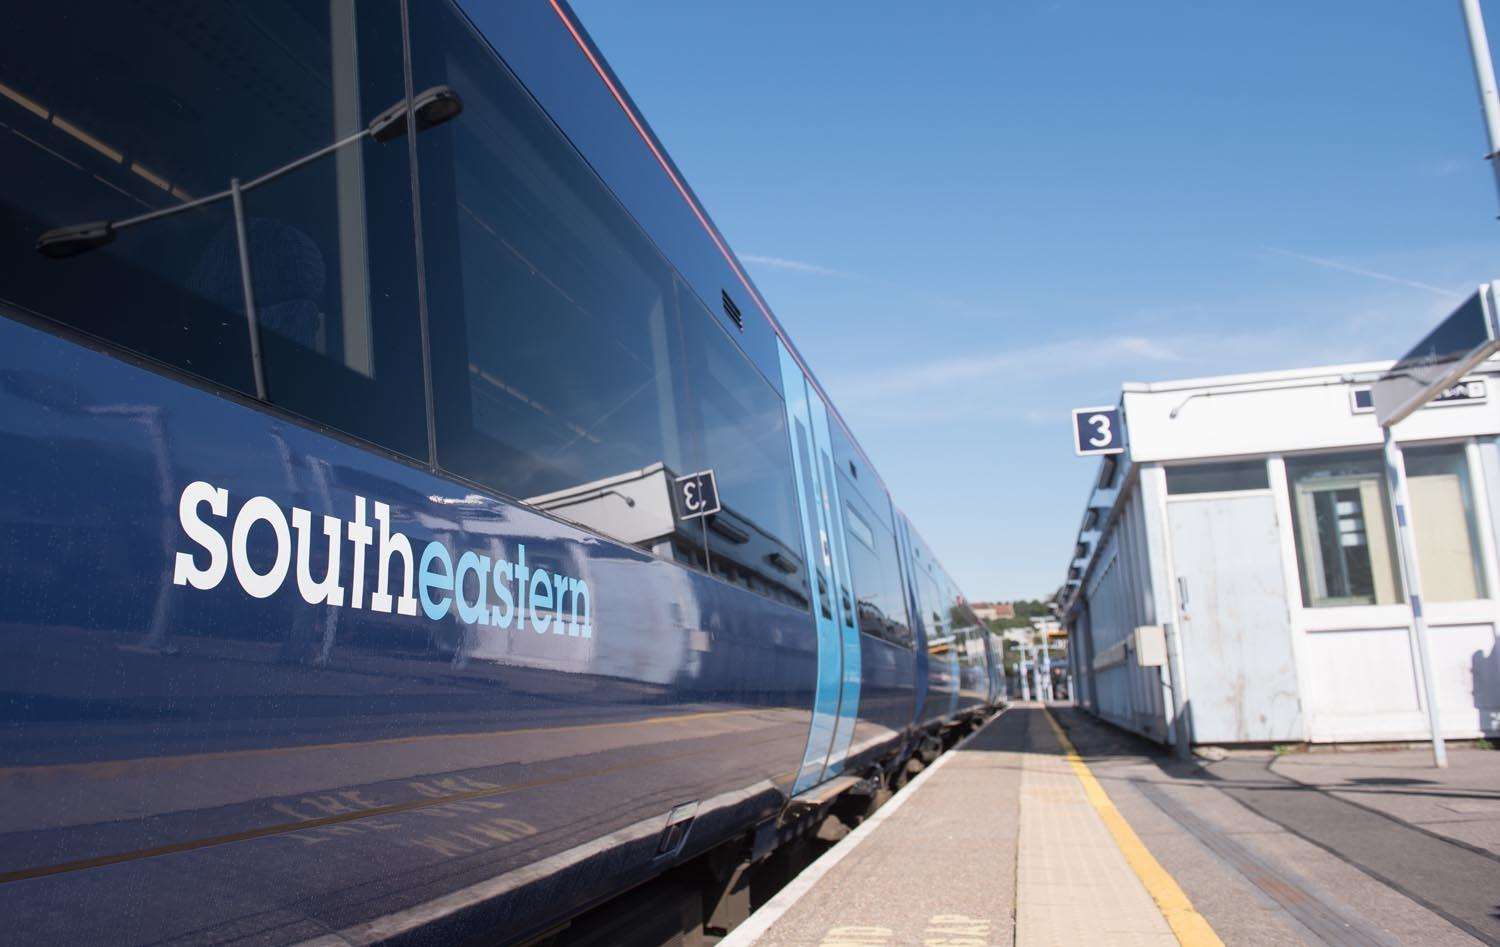 A Southeastern have introduced new timetables